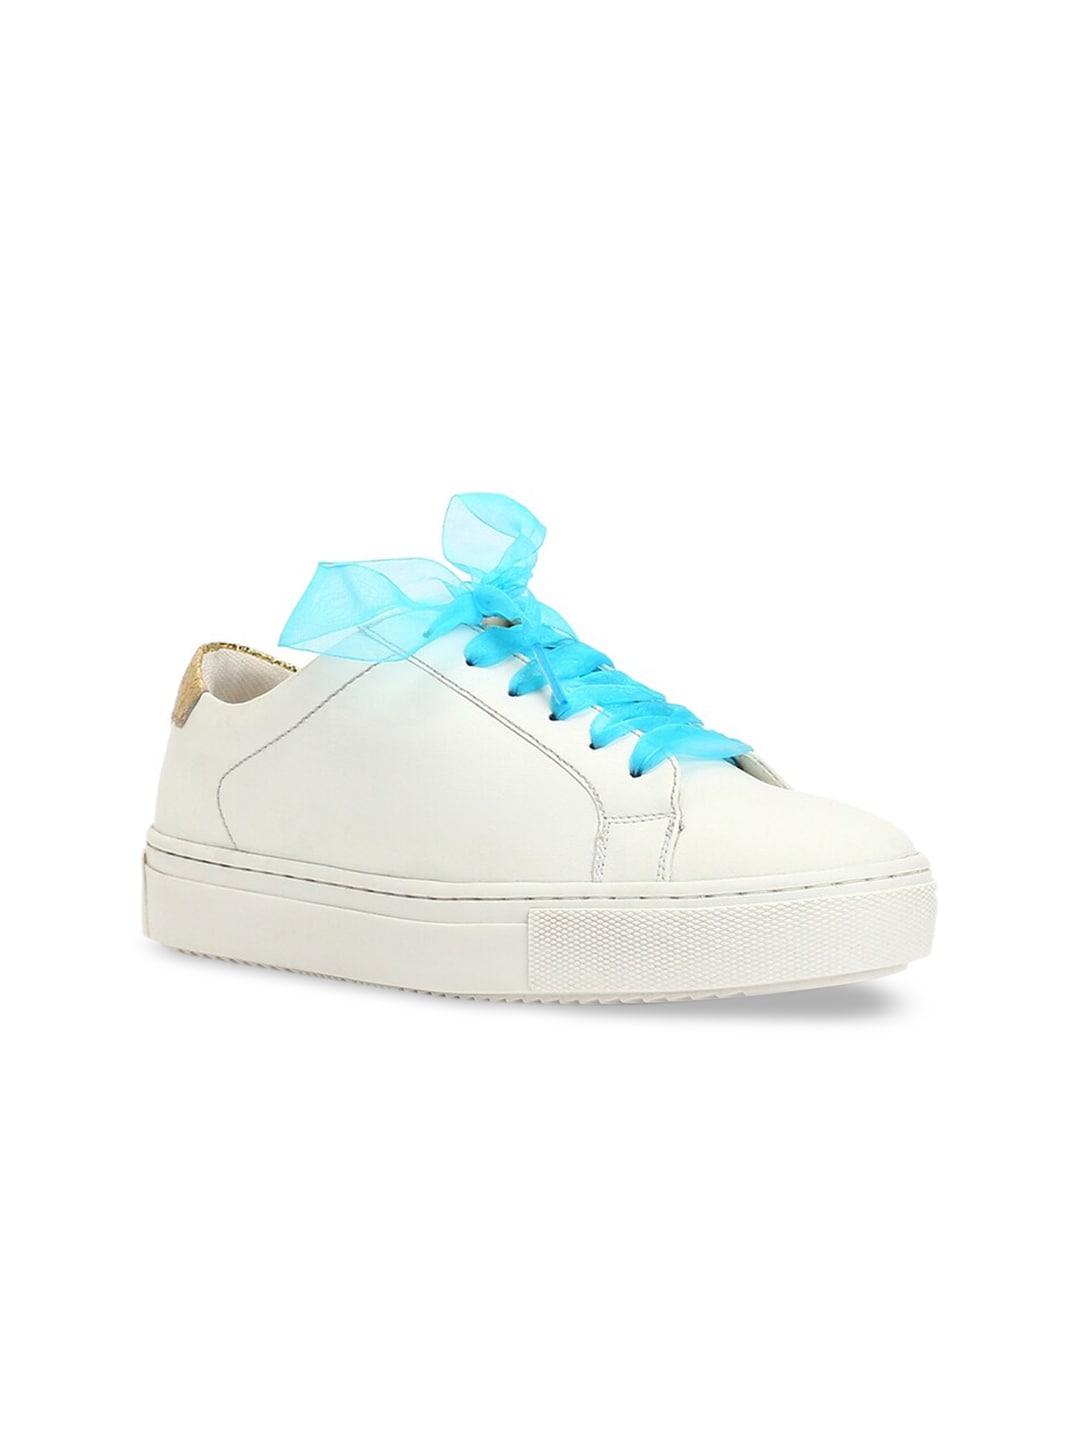 forever-21-women-white-solid-sneakers